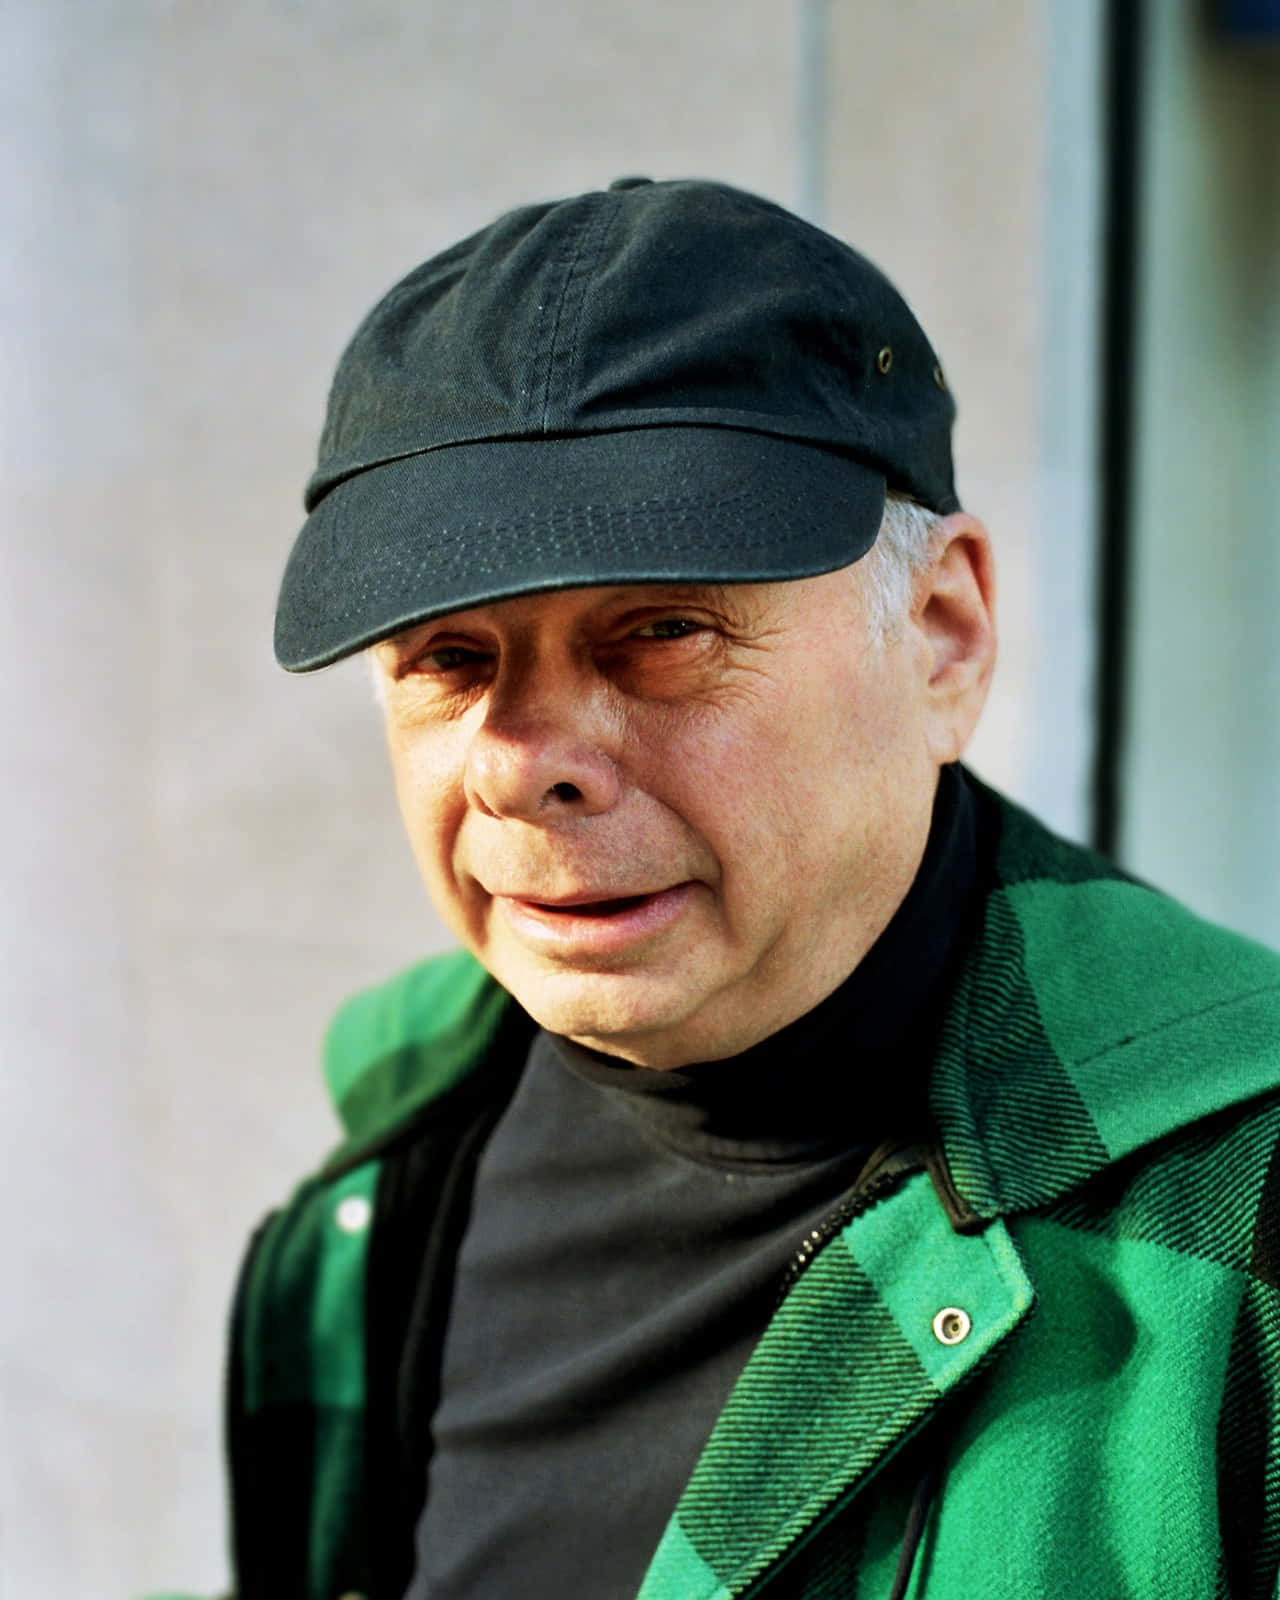 Wallace Shawn posing for a portrait Wallpaper